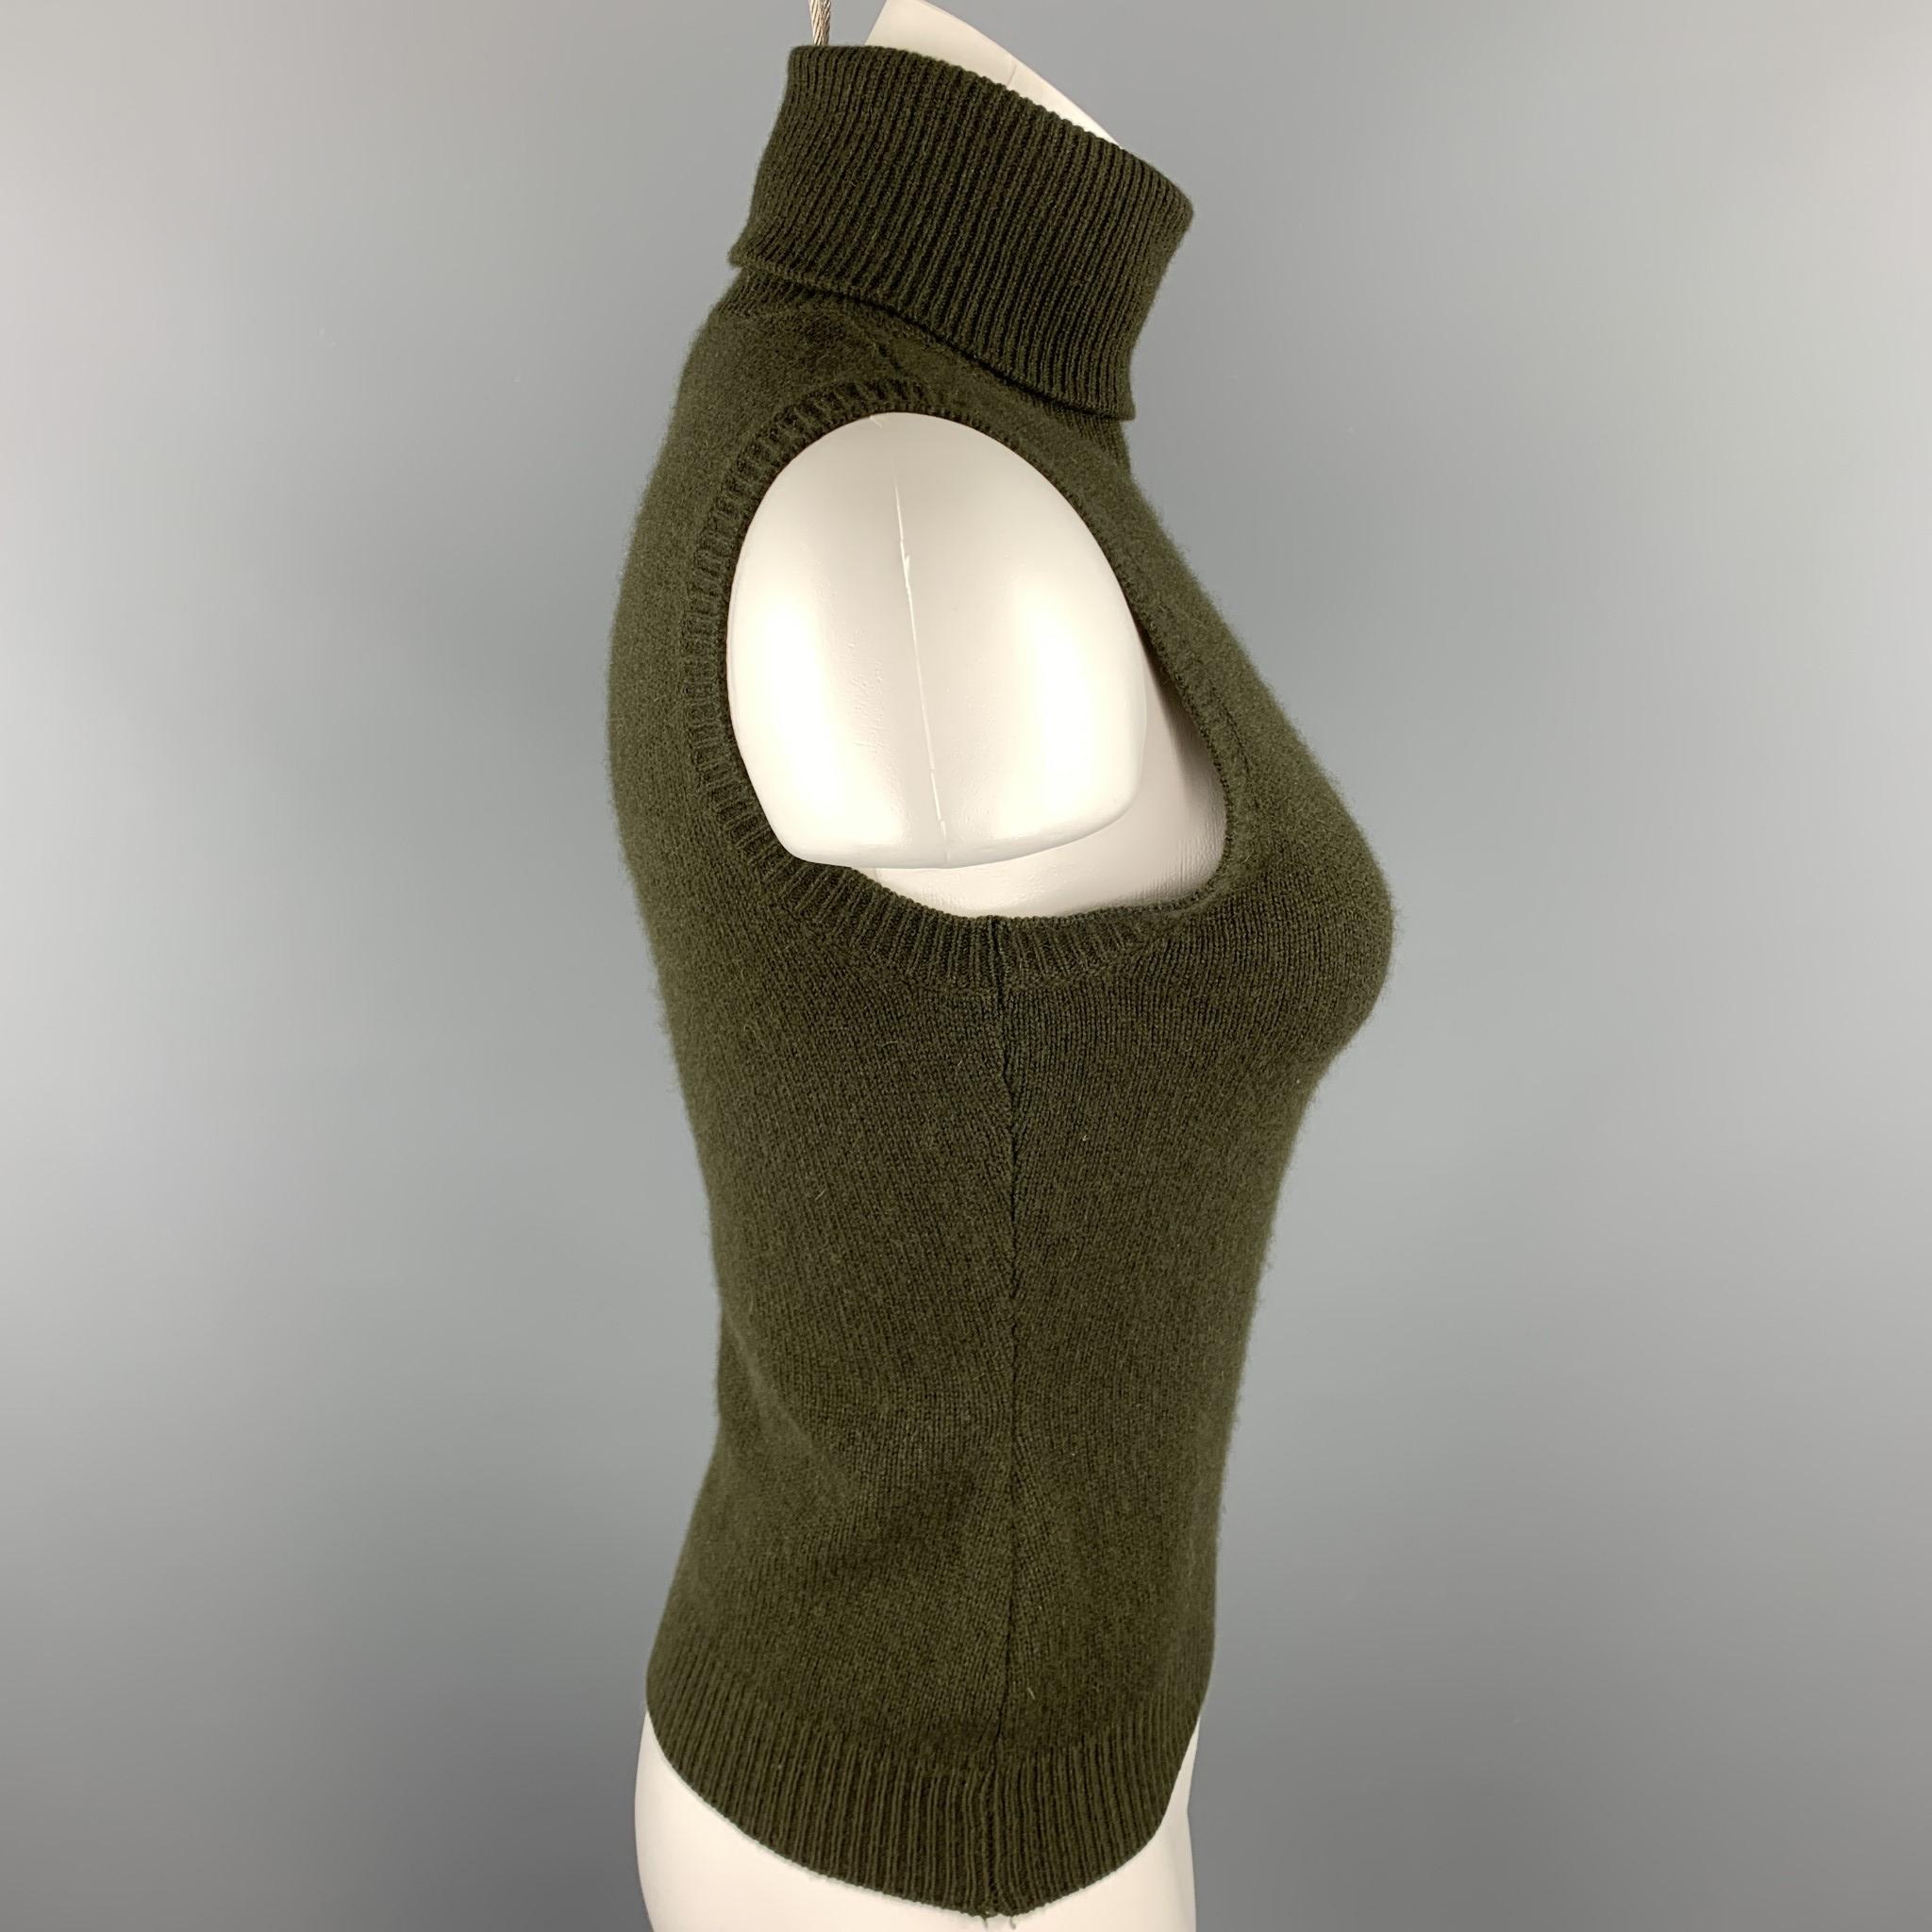 RALPH LAUREN COLLECTION sleeveless pullover comes in a olive knitted cashmere featuring a turtleneck style. Made in Italy.

Excellent Pre-Owned Condition.
Marked: S

Measurements:

Shoulder: 12.5 in.
Bust: 30 in. 
Length: 20 in. 